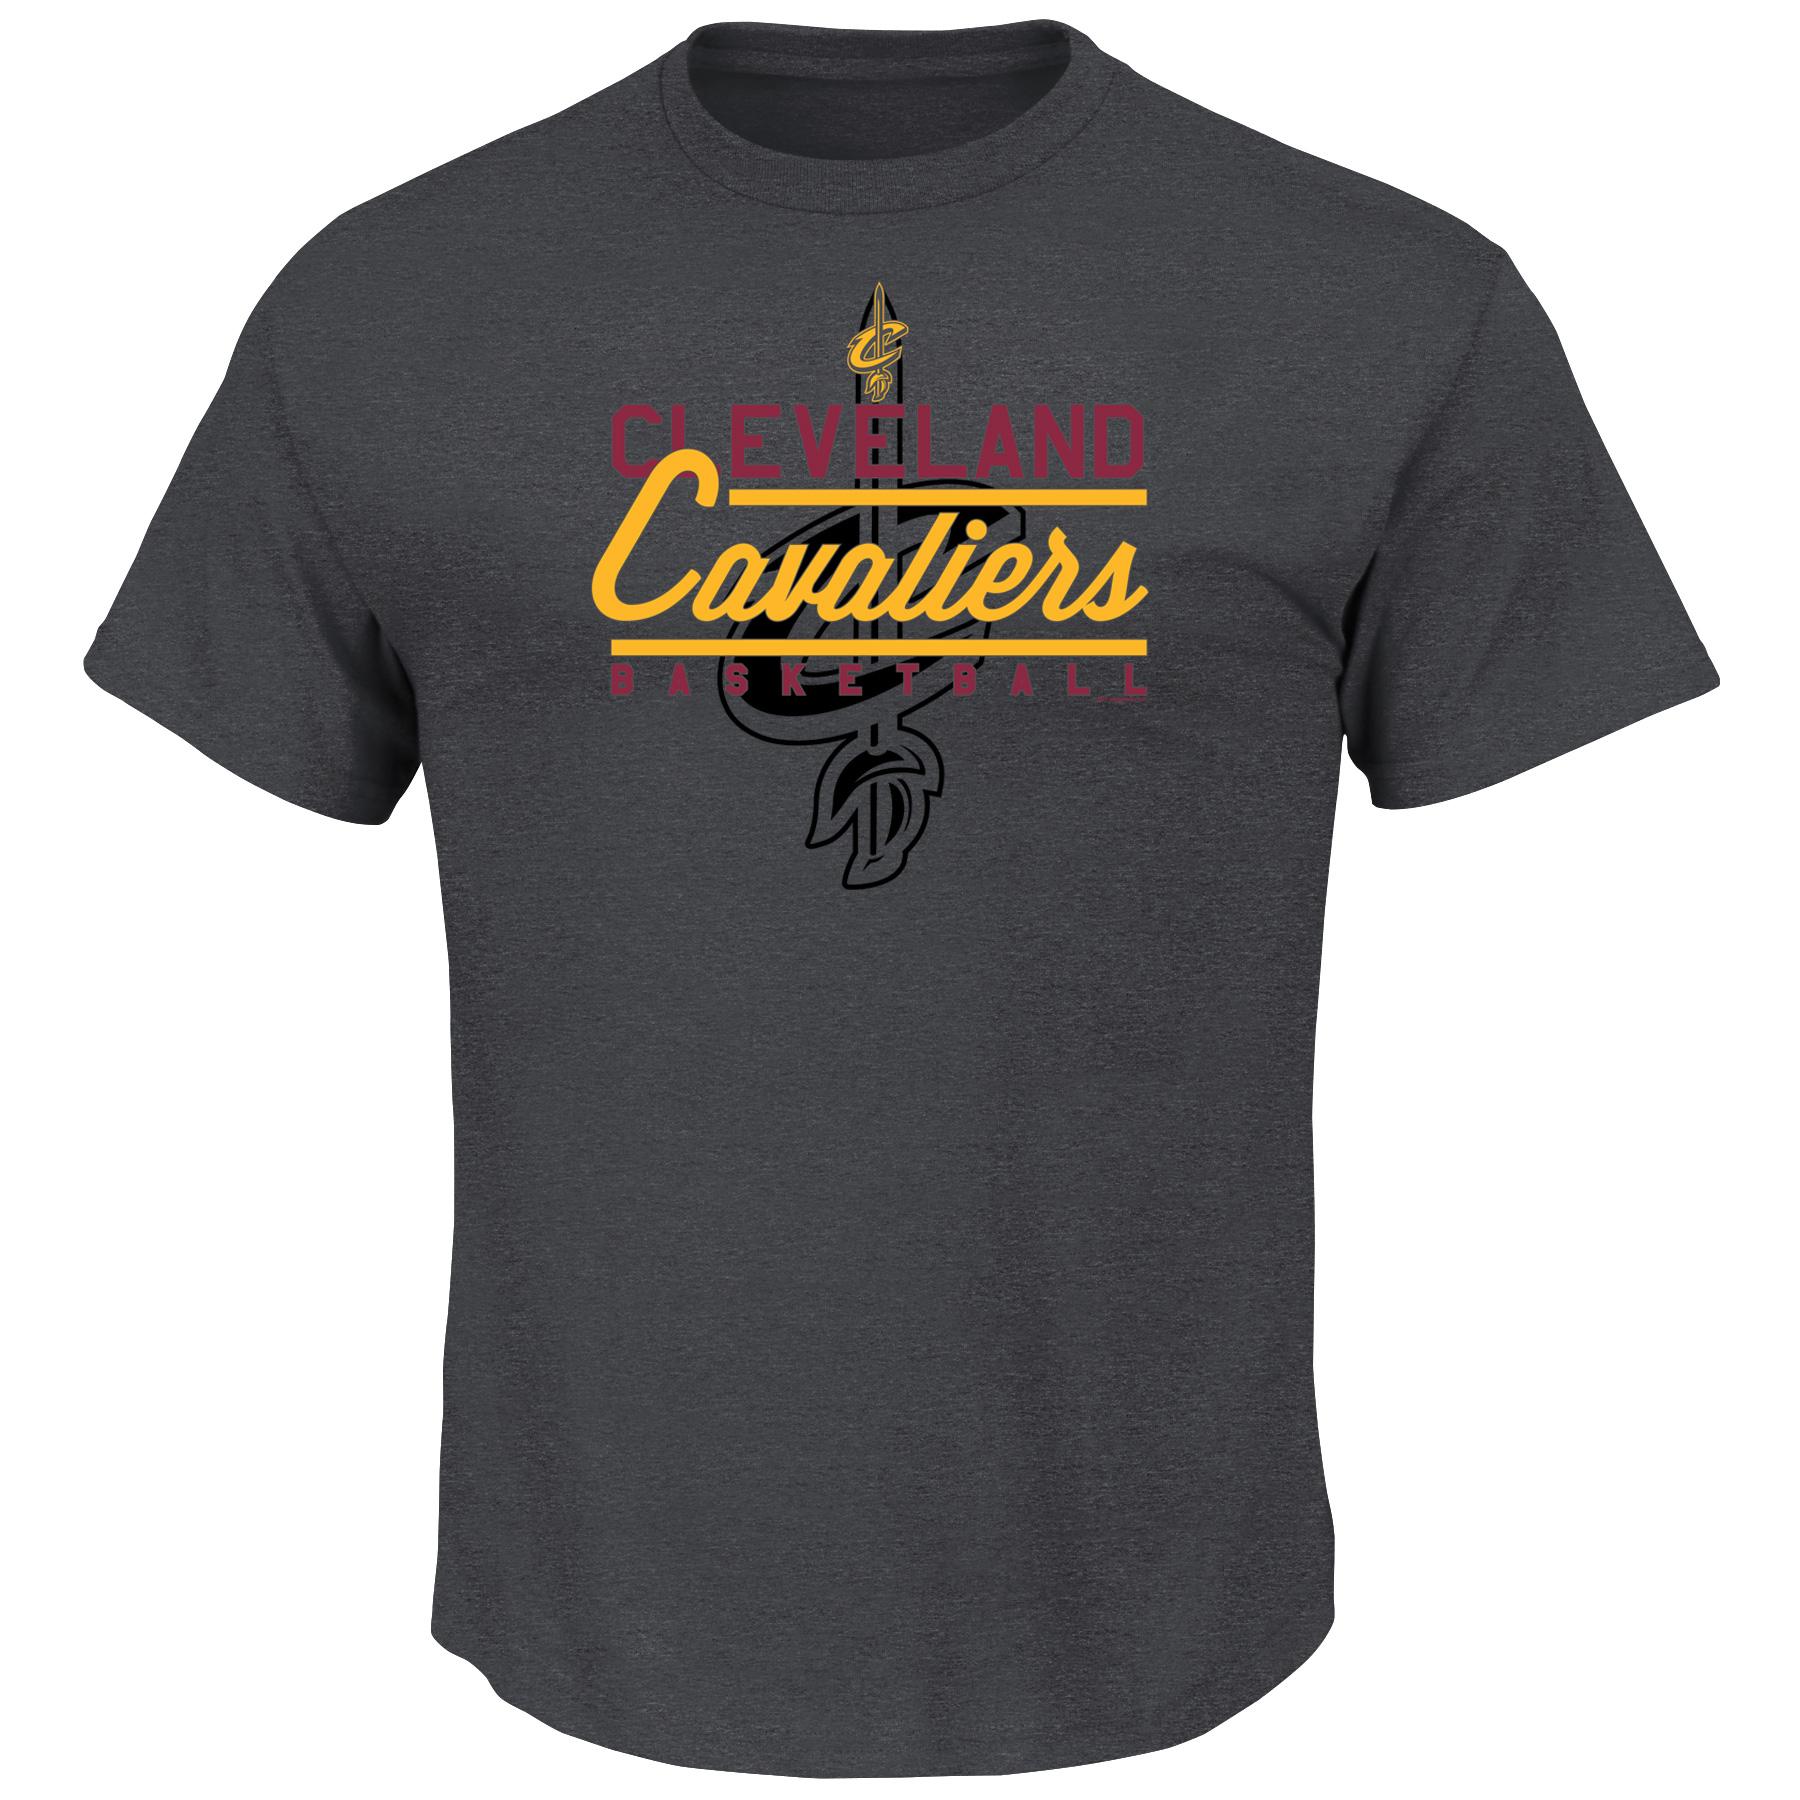 NBA(CANONICAL) Men's Gray Graphic T-Shirt - Cleveland Cavaliers